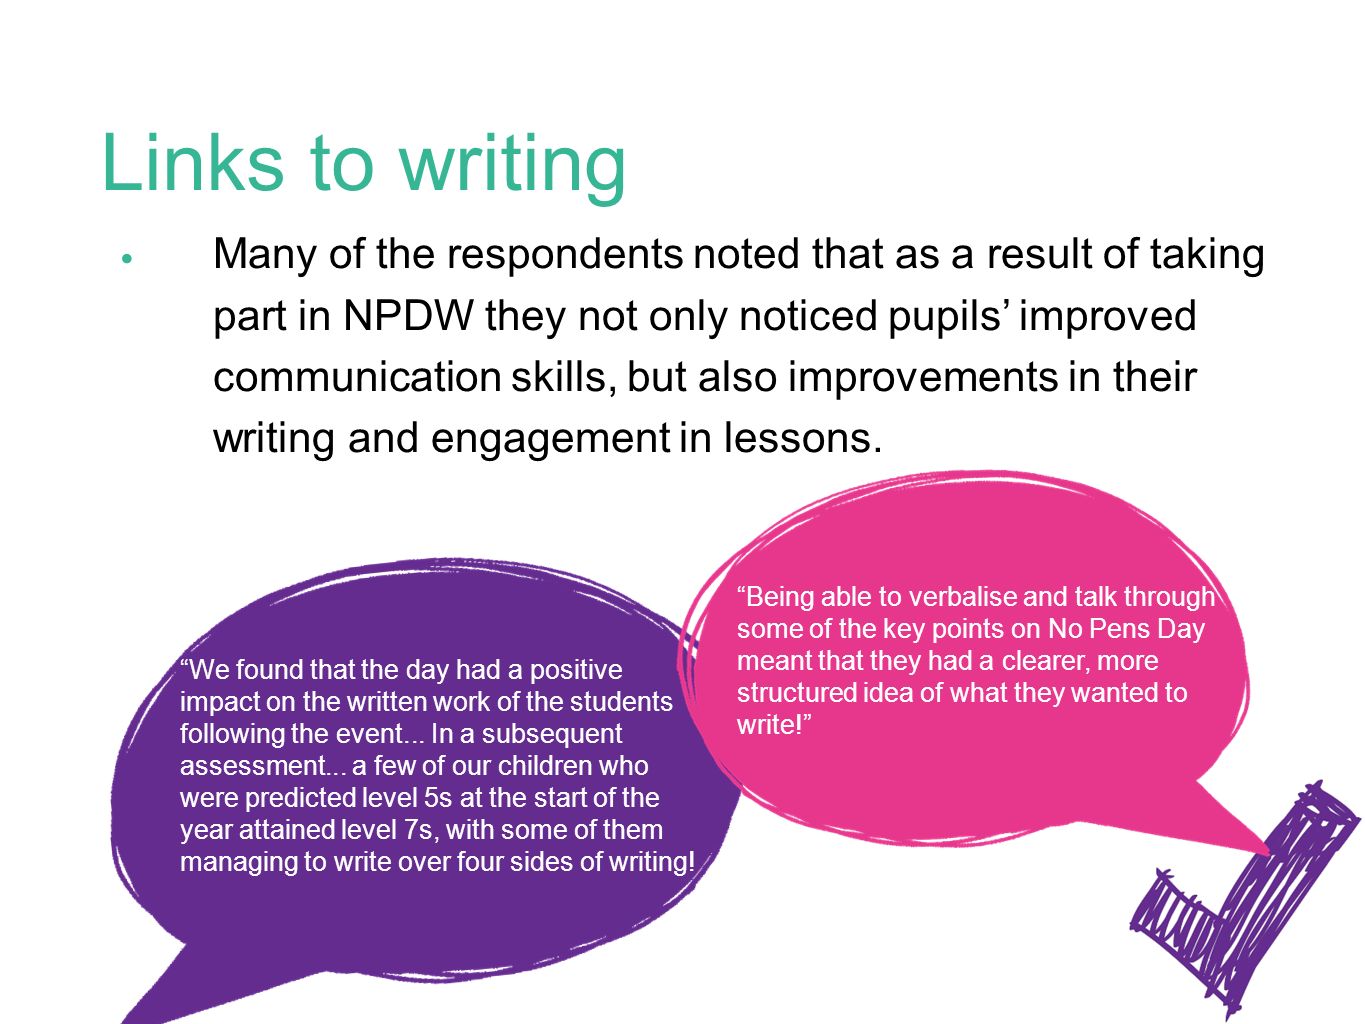 Links to writing Many of the respondents noted that as a result of taking part in NPDW they not only noticed pupils’ improved communication skills, but also improvements in their writing and engagement in lessons.